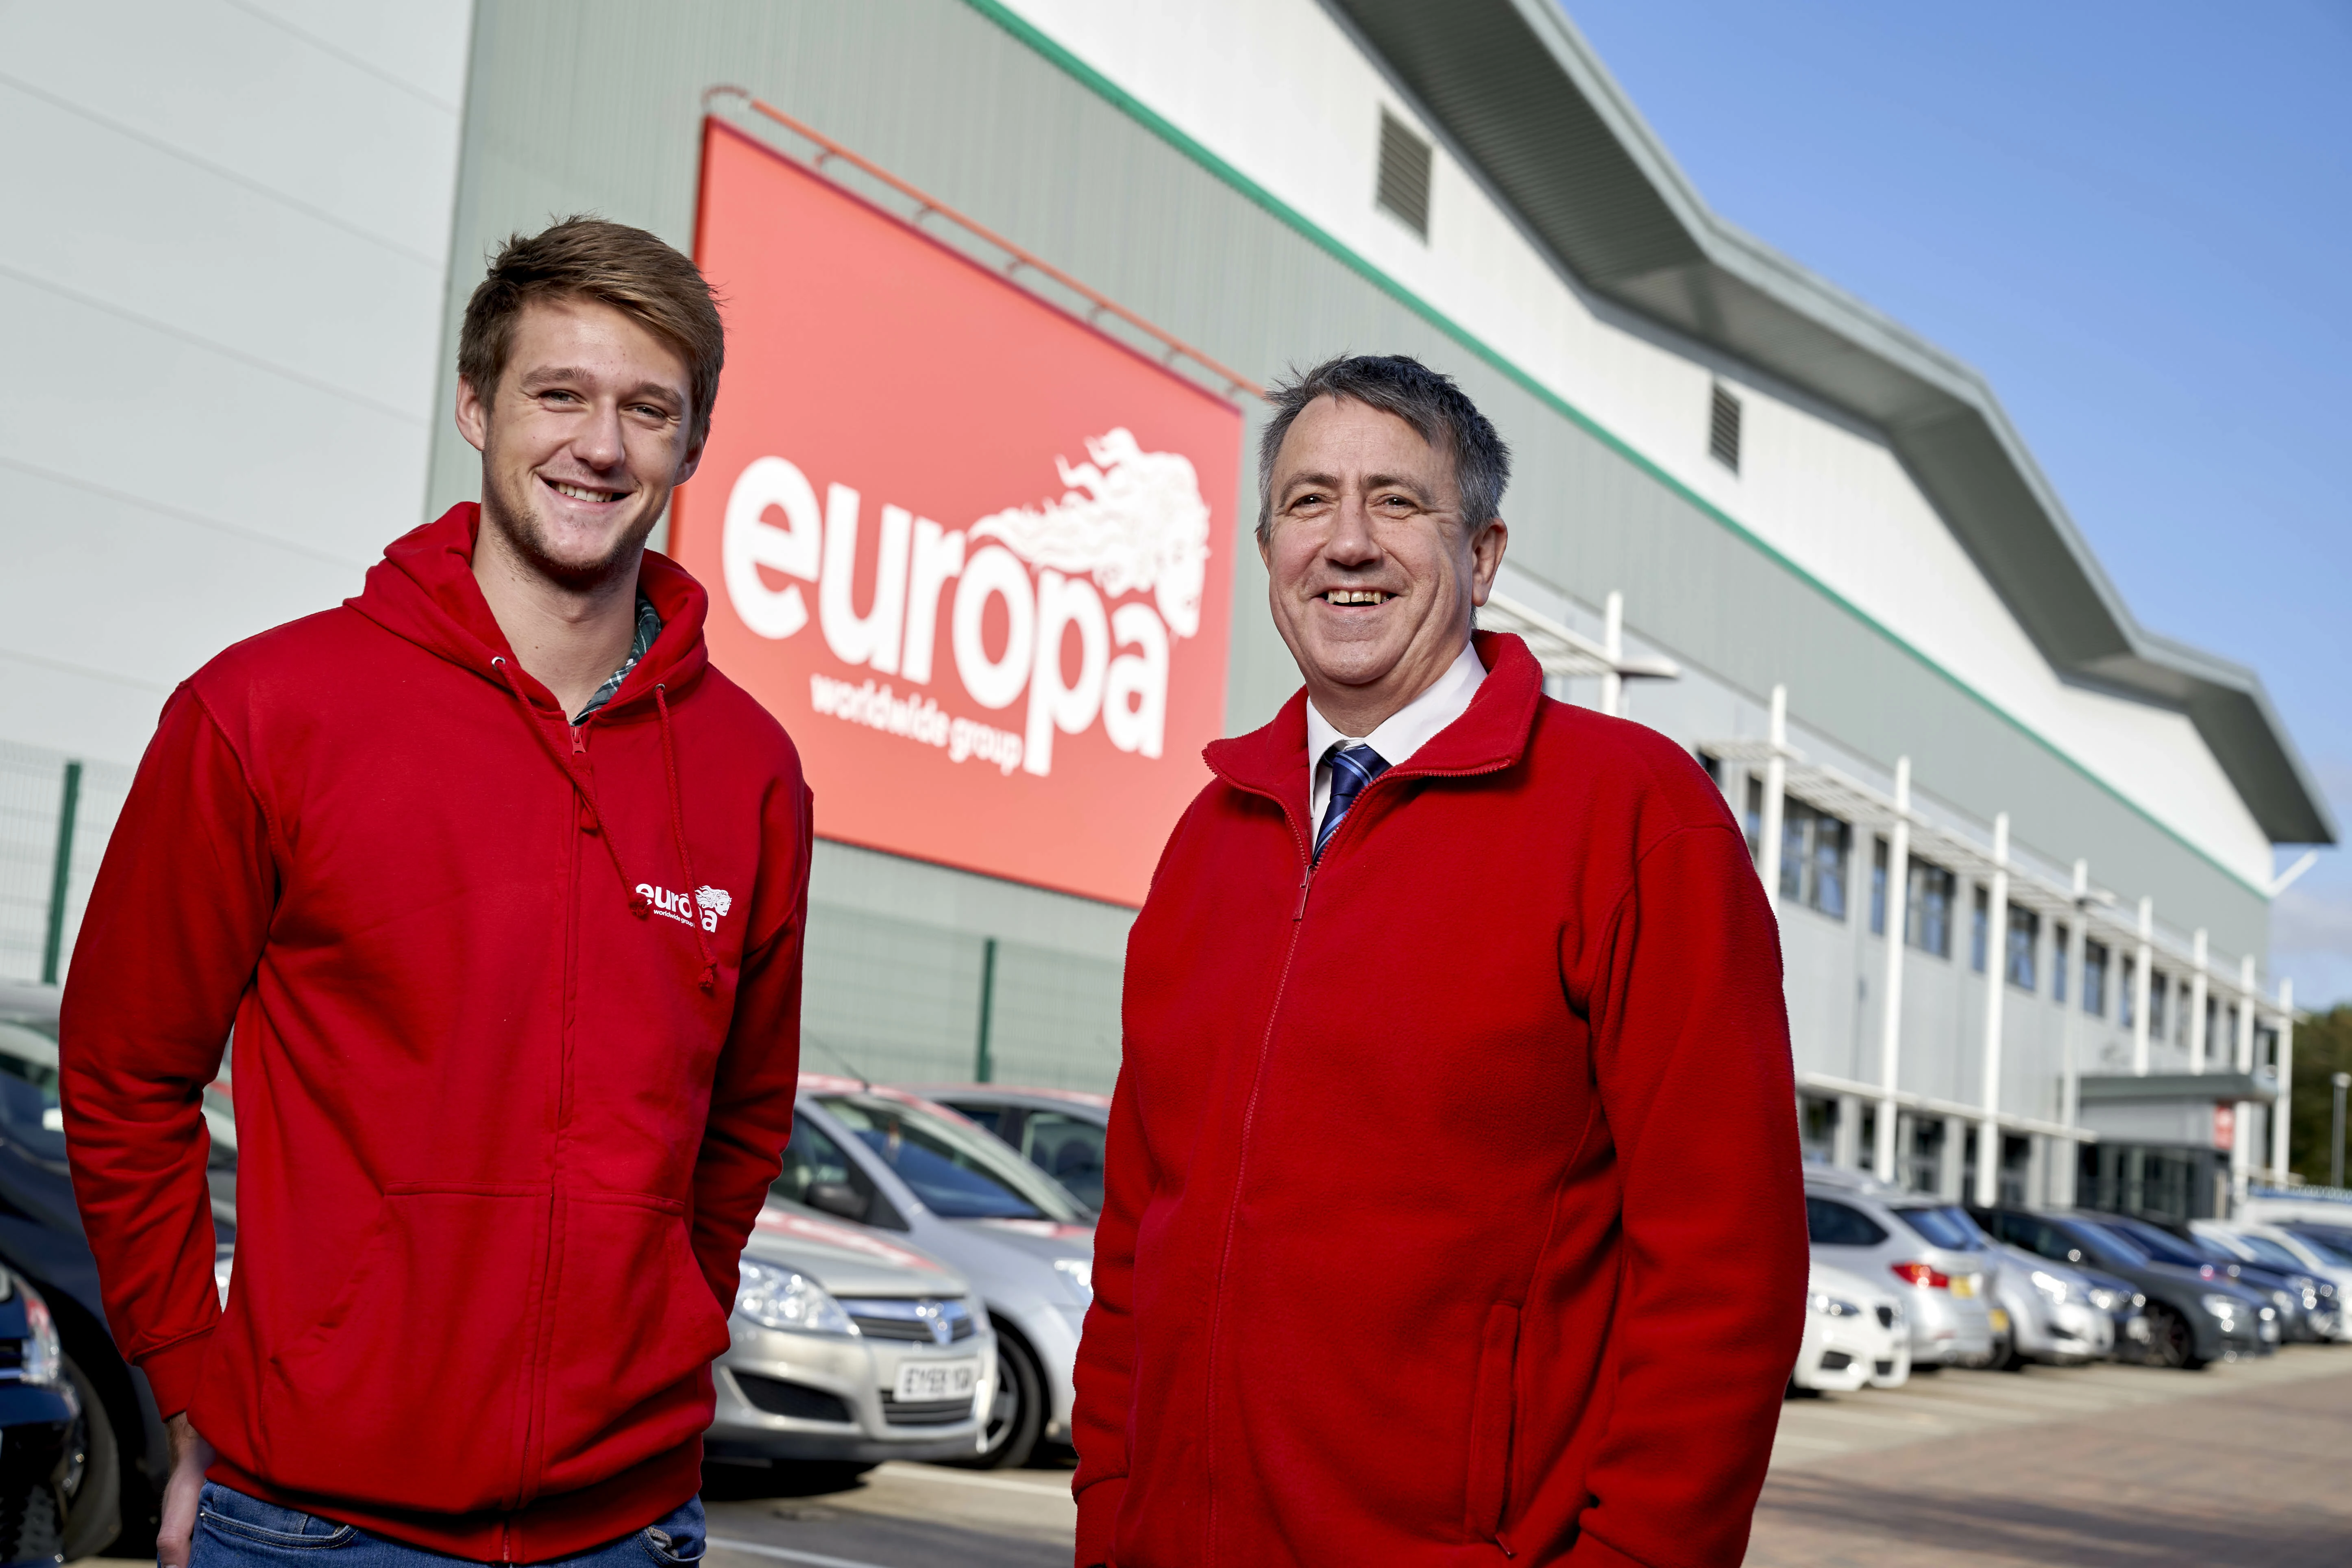 Jack Baxter and Jeff Broom of Europa Showfreight